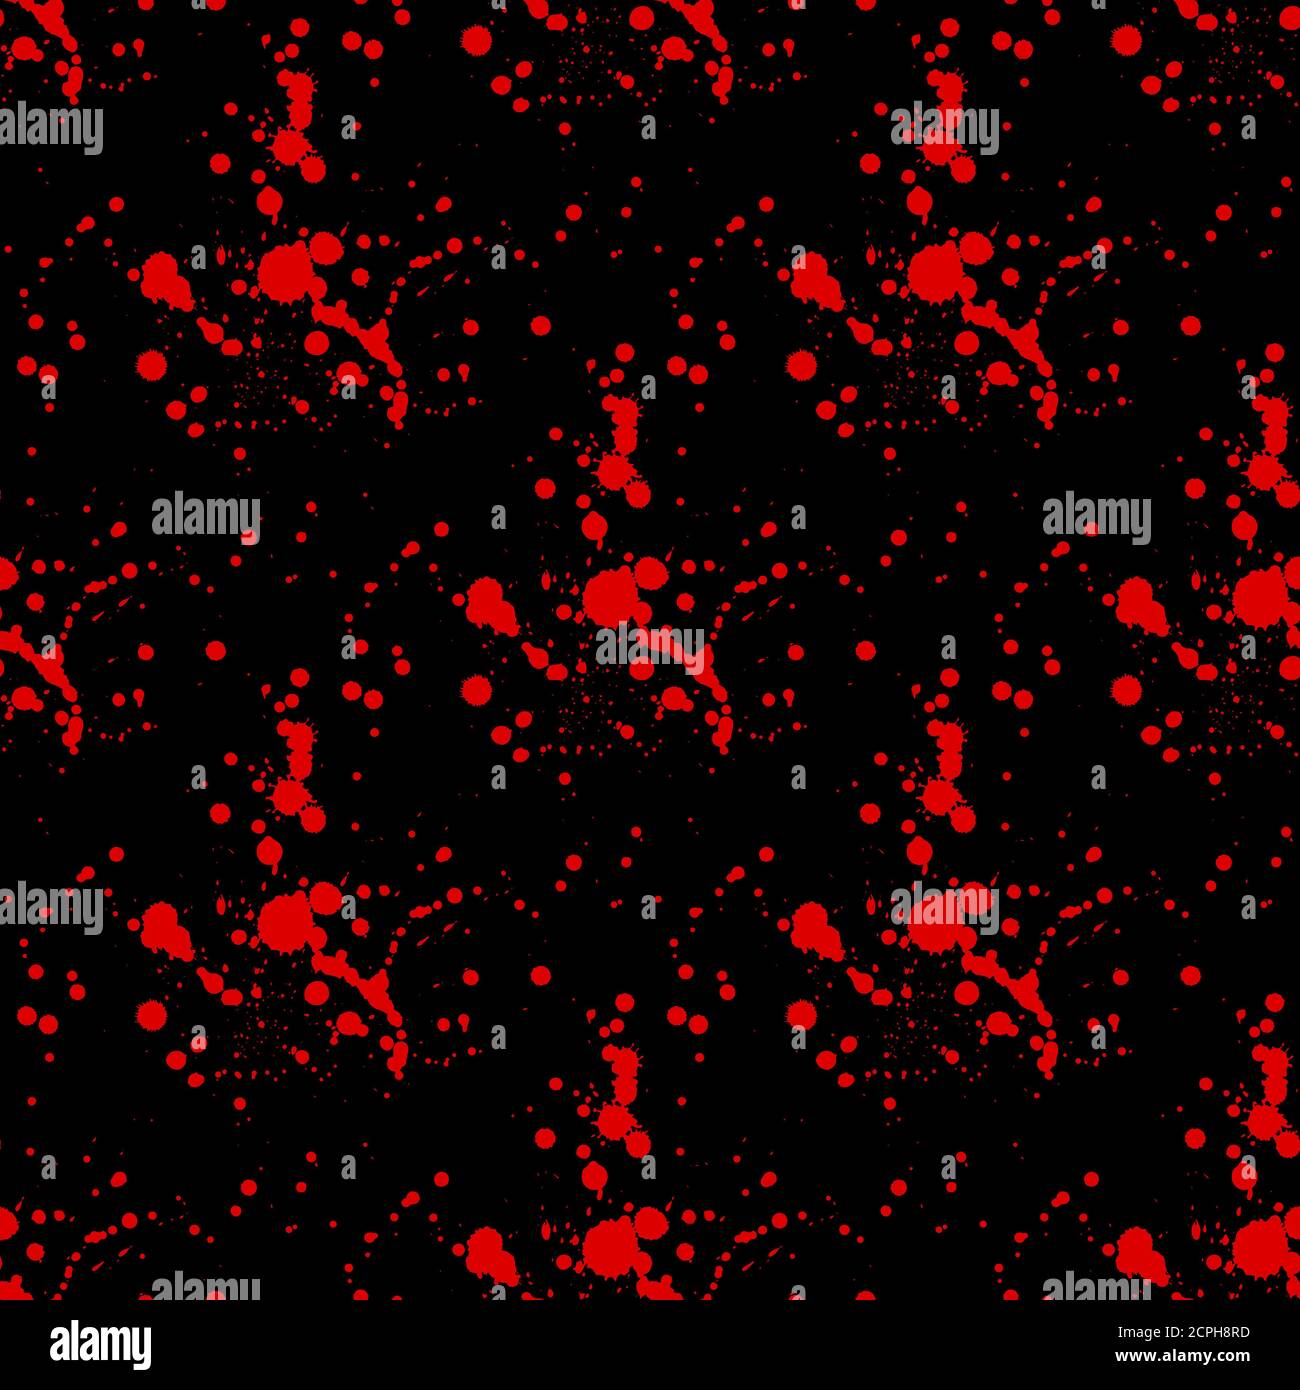 Blood spatter paper Stock Vector Images - Alamy